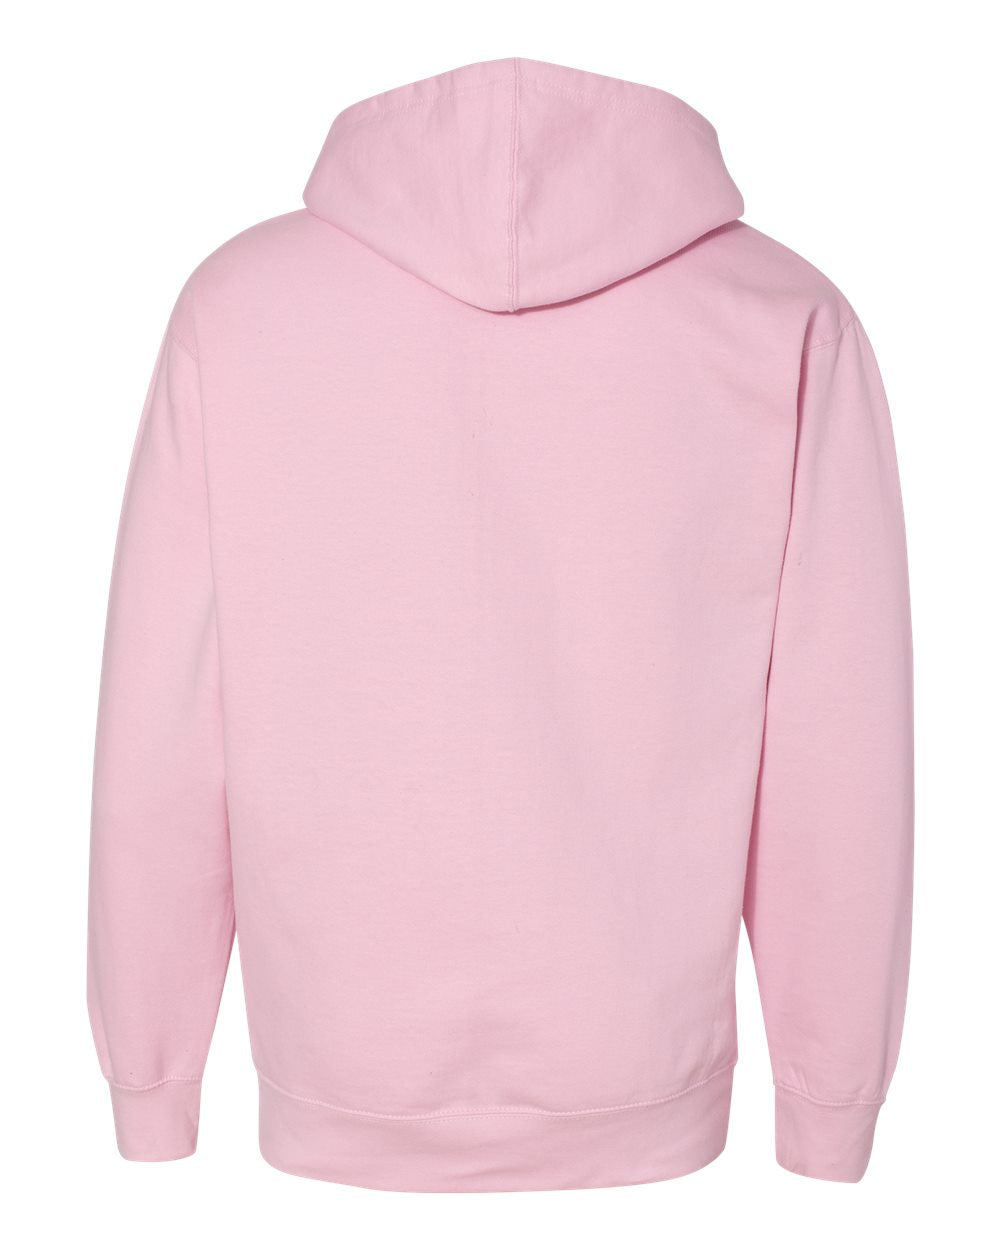 Independent Trading Co. Midweight Hooded Sweatshirt SS4500 #color_Light Pink